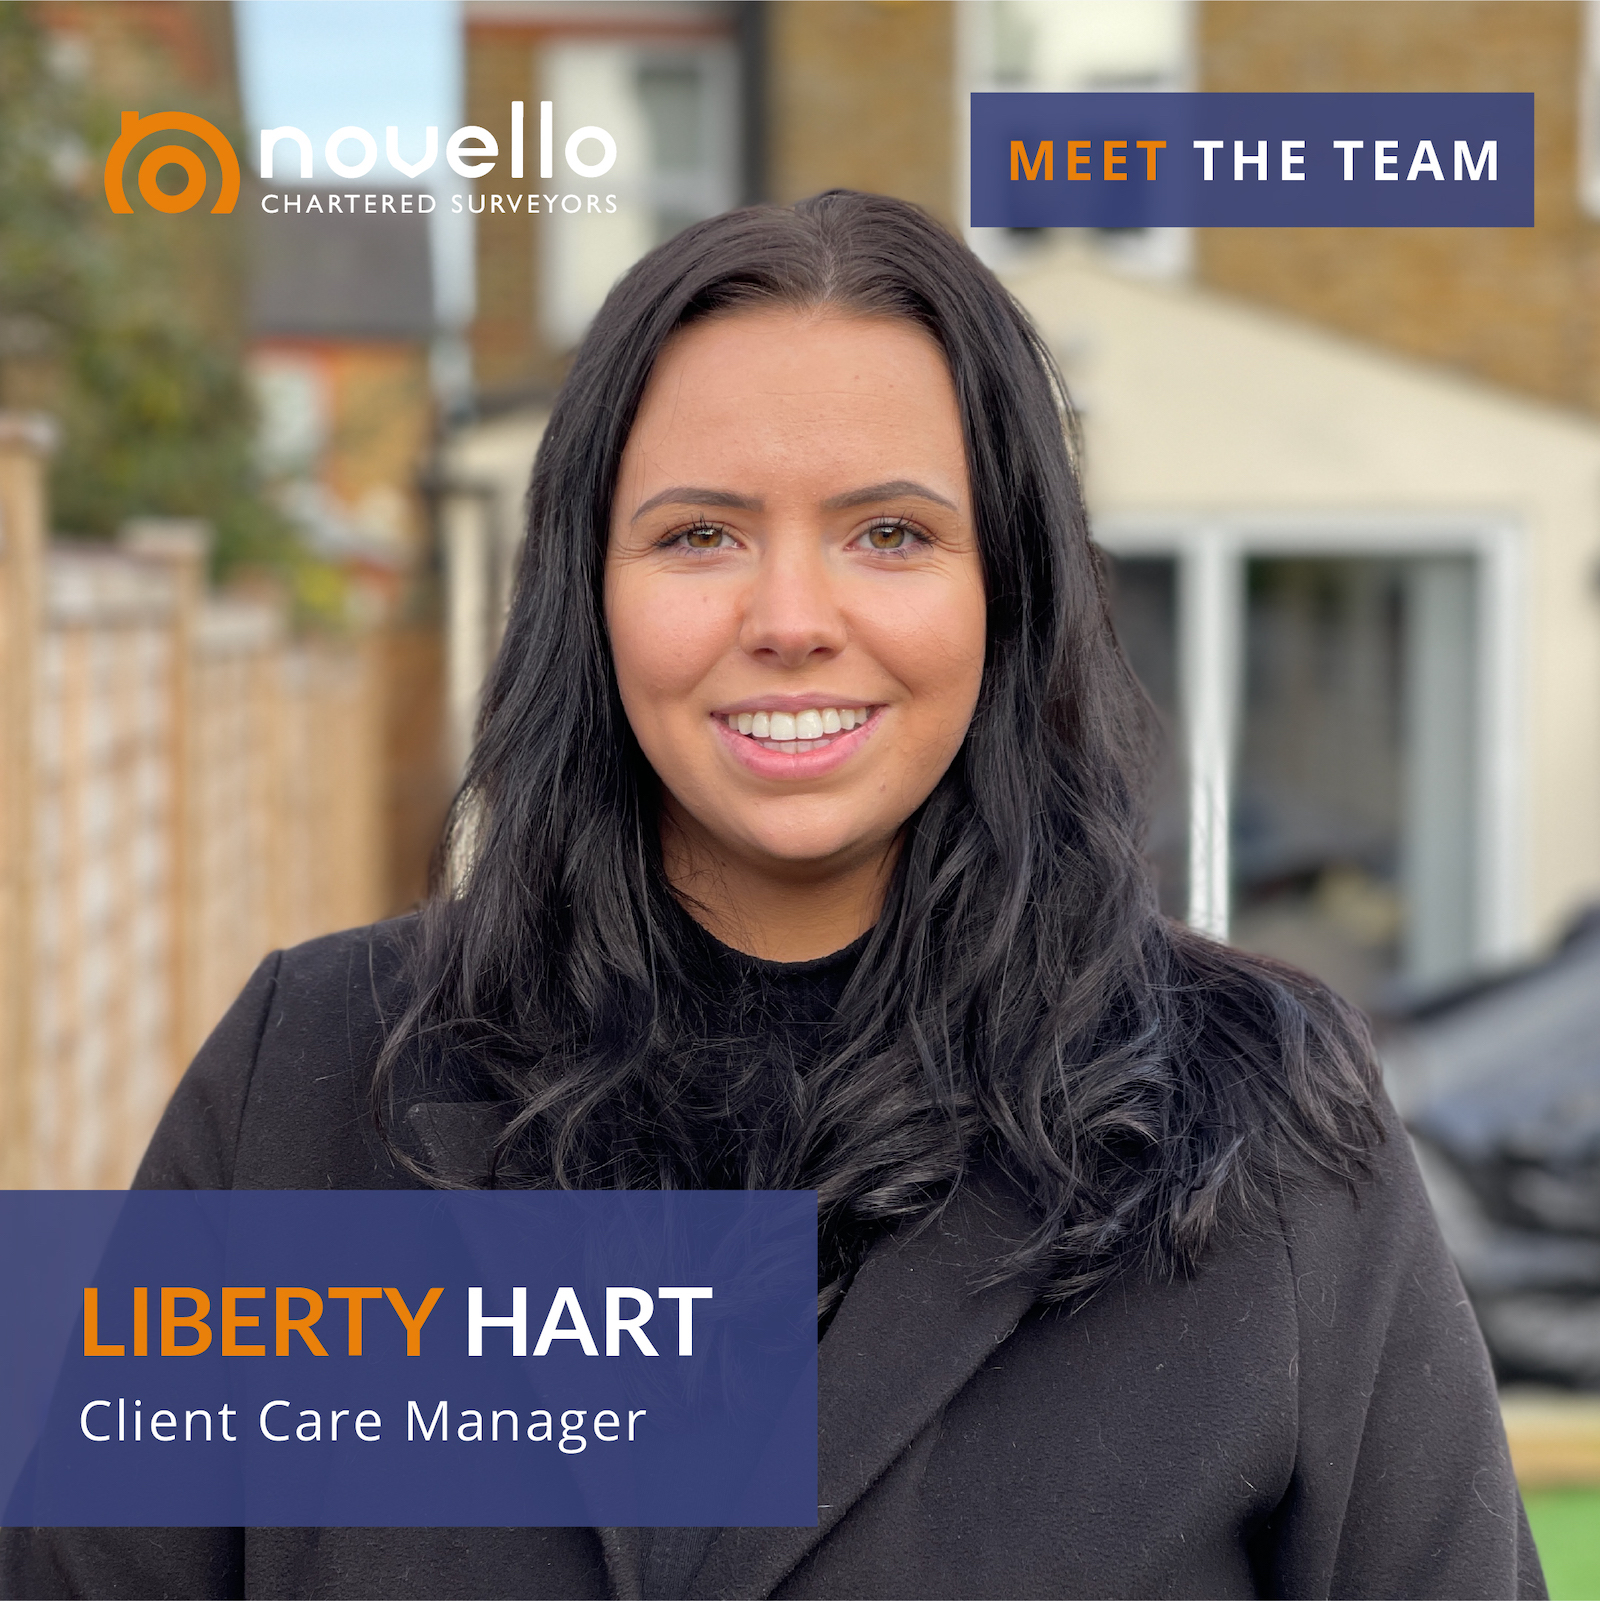 Meet the Team - Liberty Hart | Personal Assistant and Client Care Manager